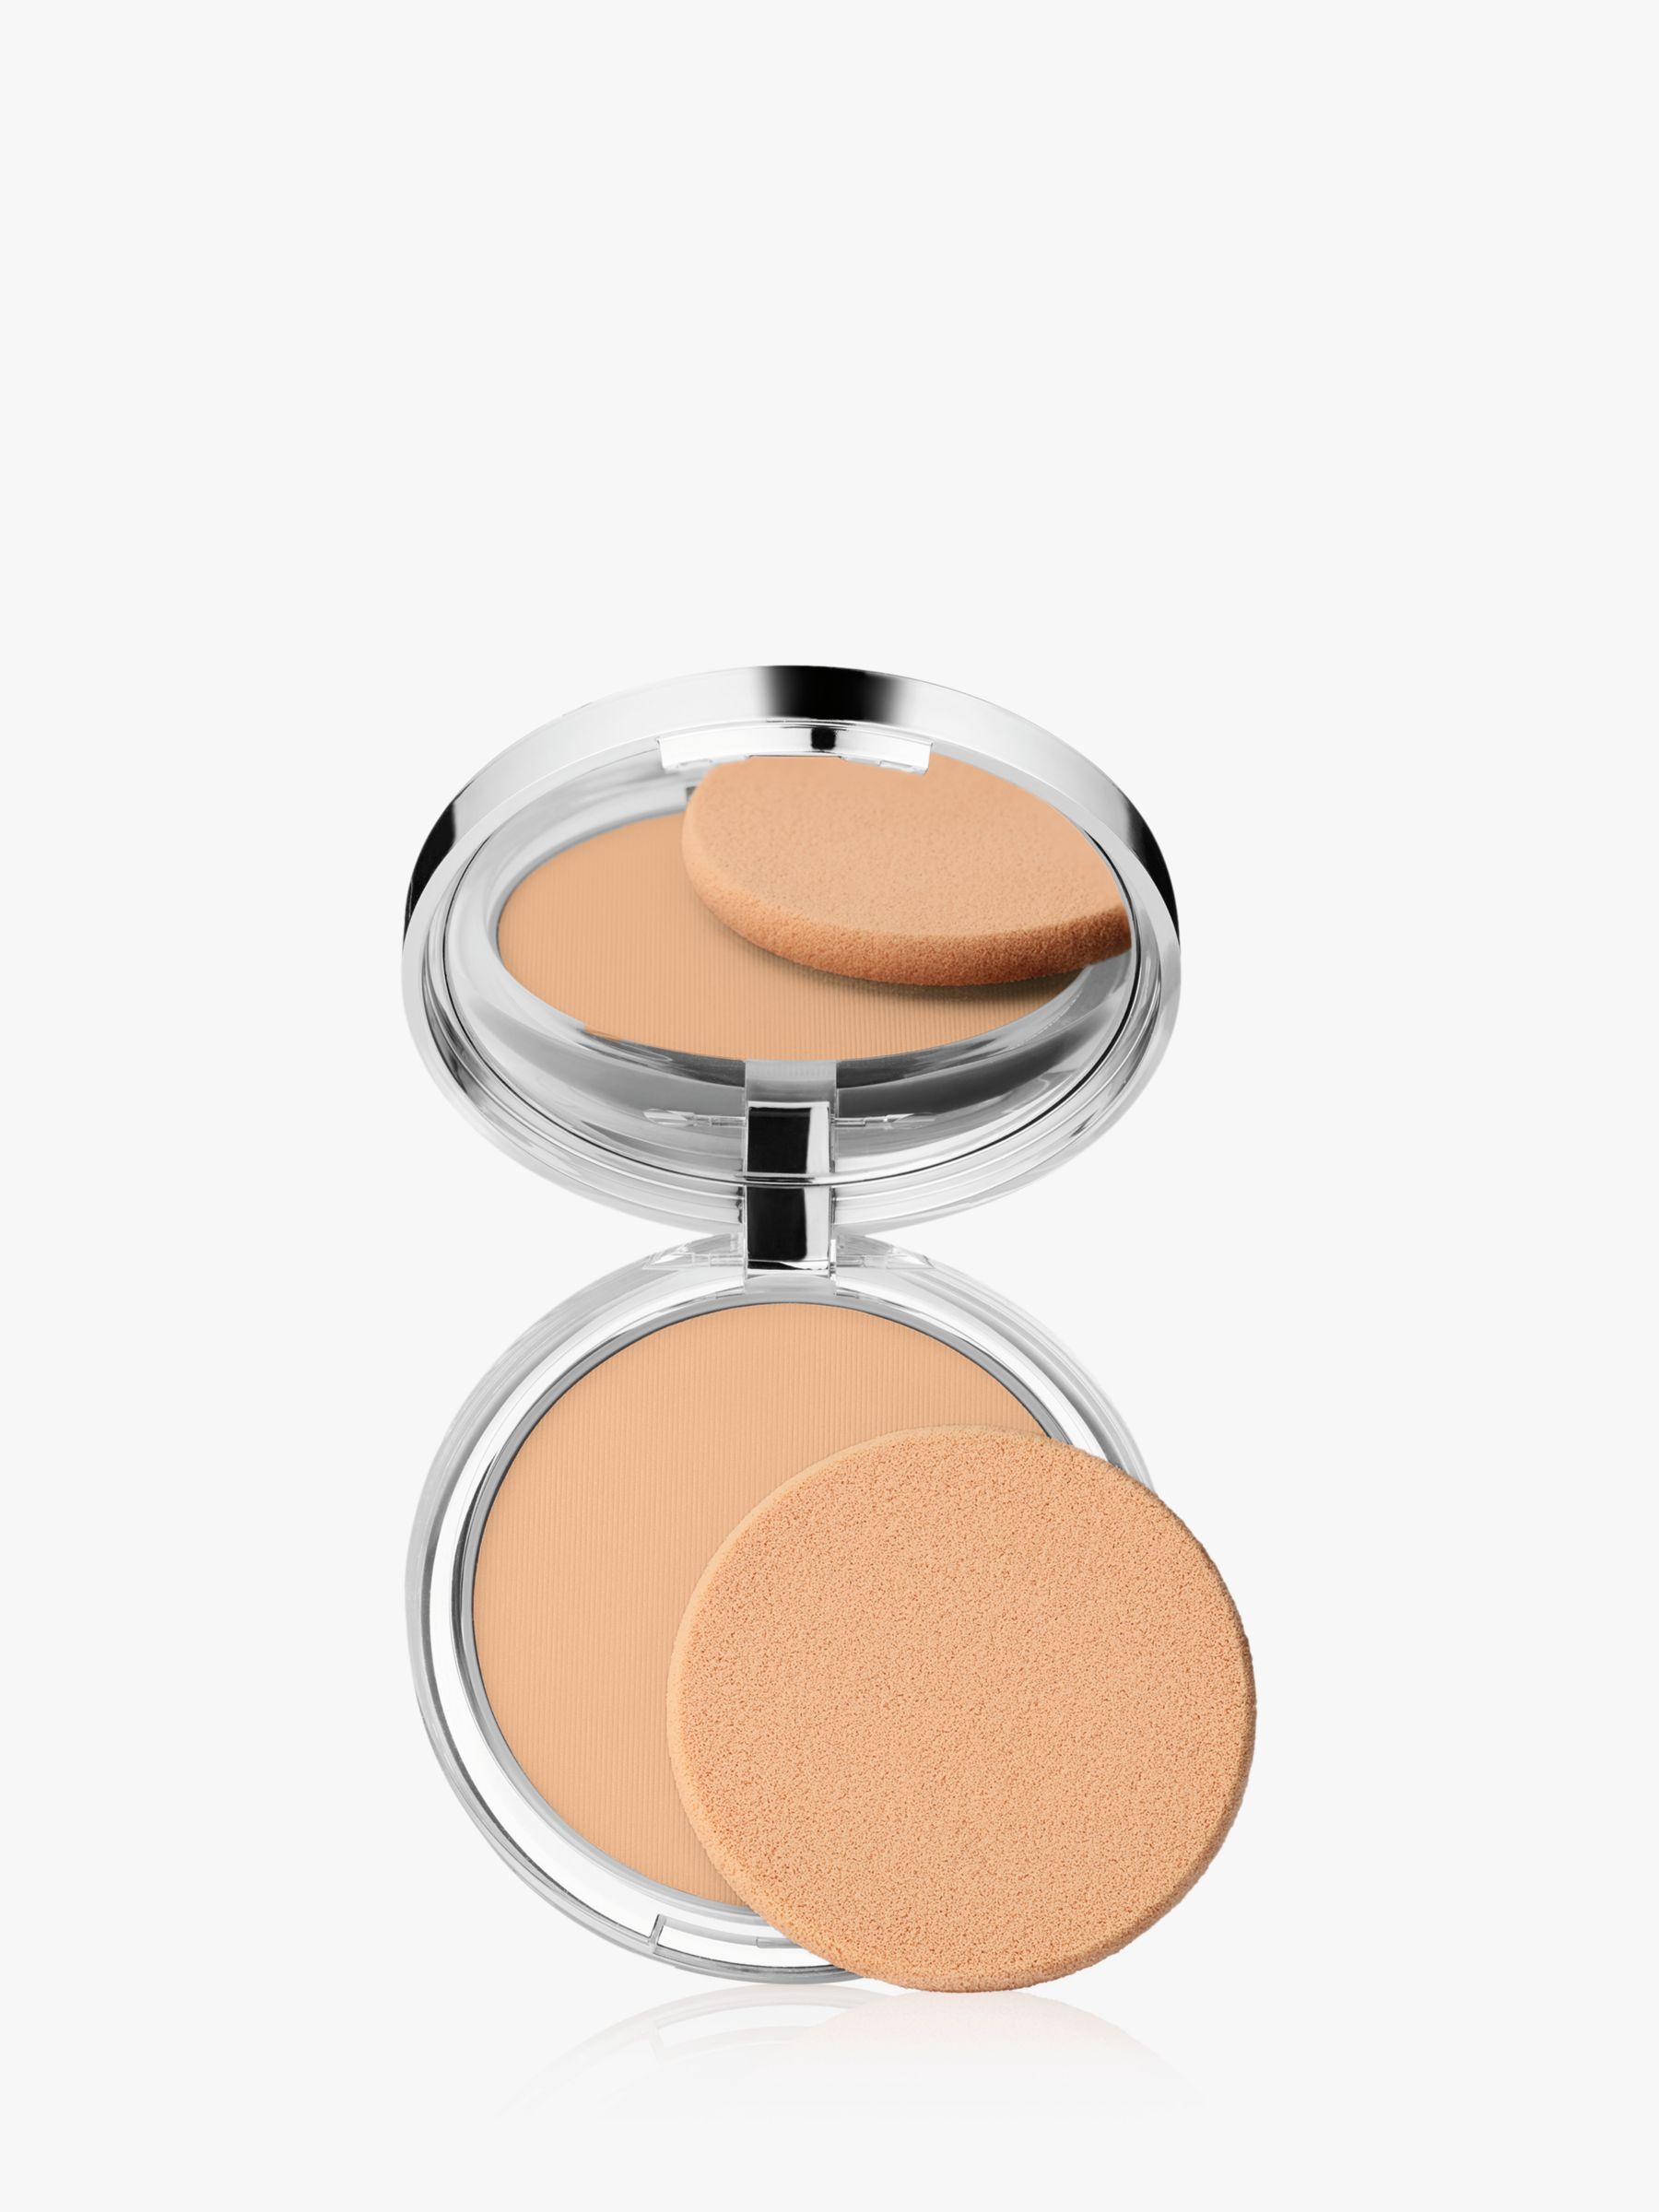 Clinique Stay-Matte Sheer Pressed Powder Oil-Free, Stay Beige 1